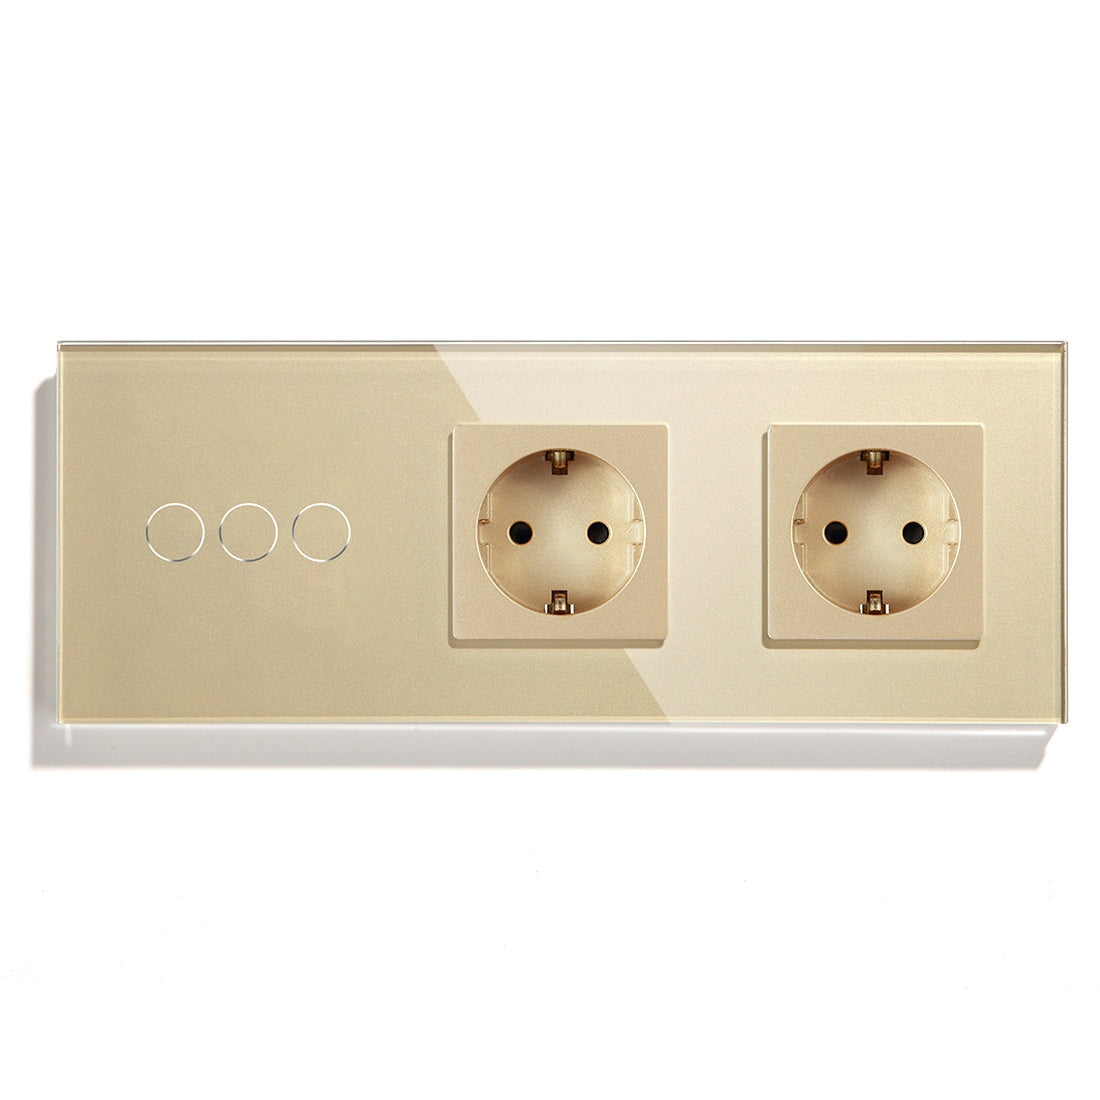 Bseed 1/2/3 Gang 1/2/3 Way Switch with Trible Socket Work Wall Plates & Covers Bseedswitch Golden 3 Gang 1way